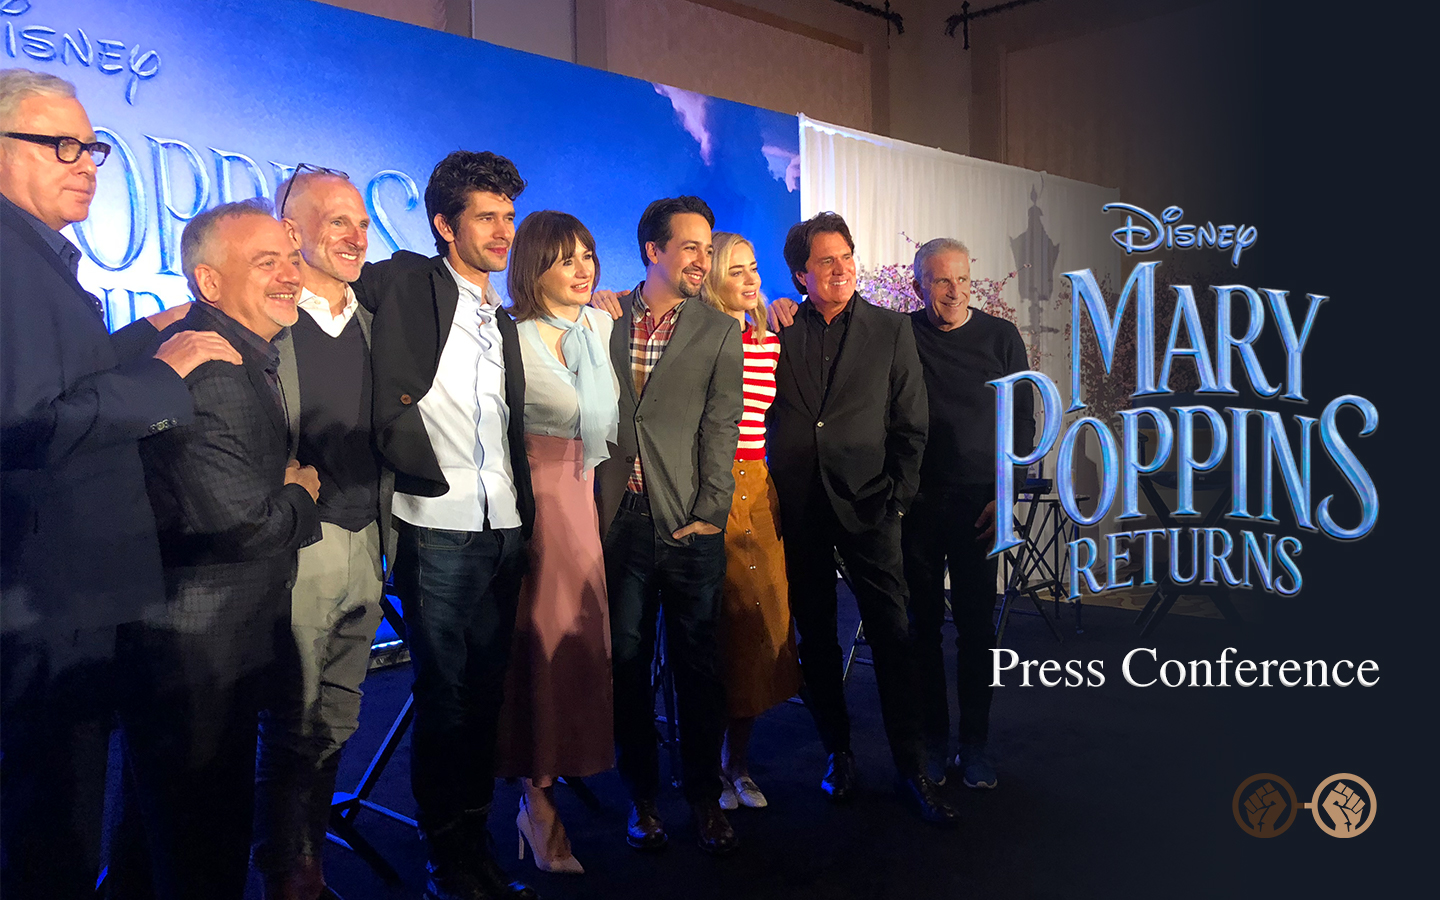 What We Learned From the ‘Mary Poppins Returns’ Press Conference